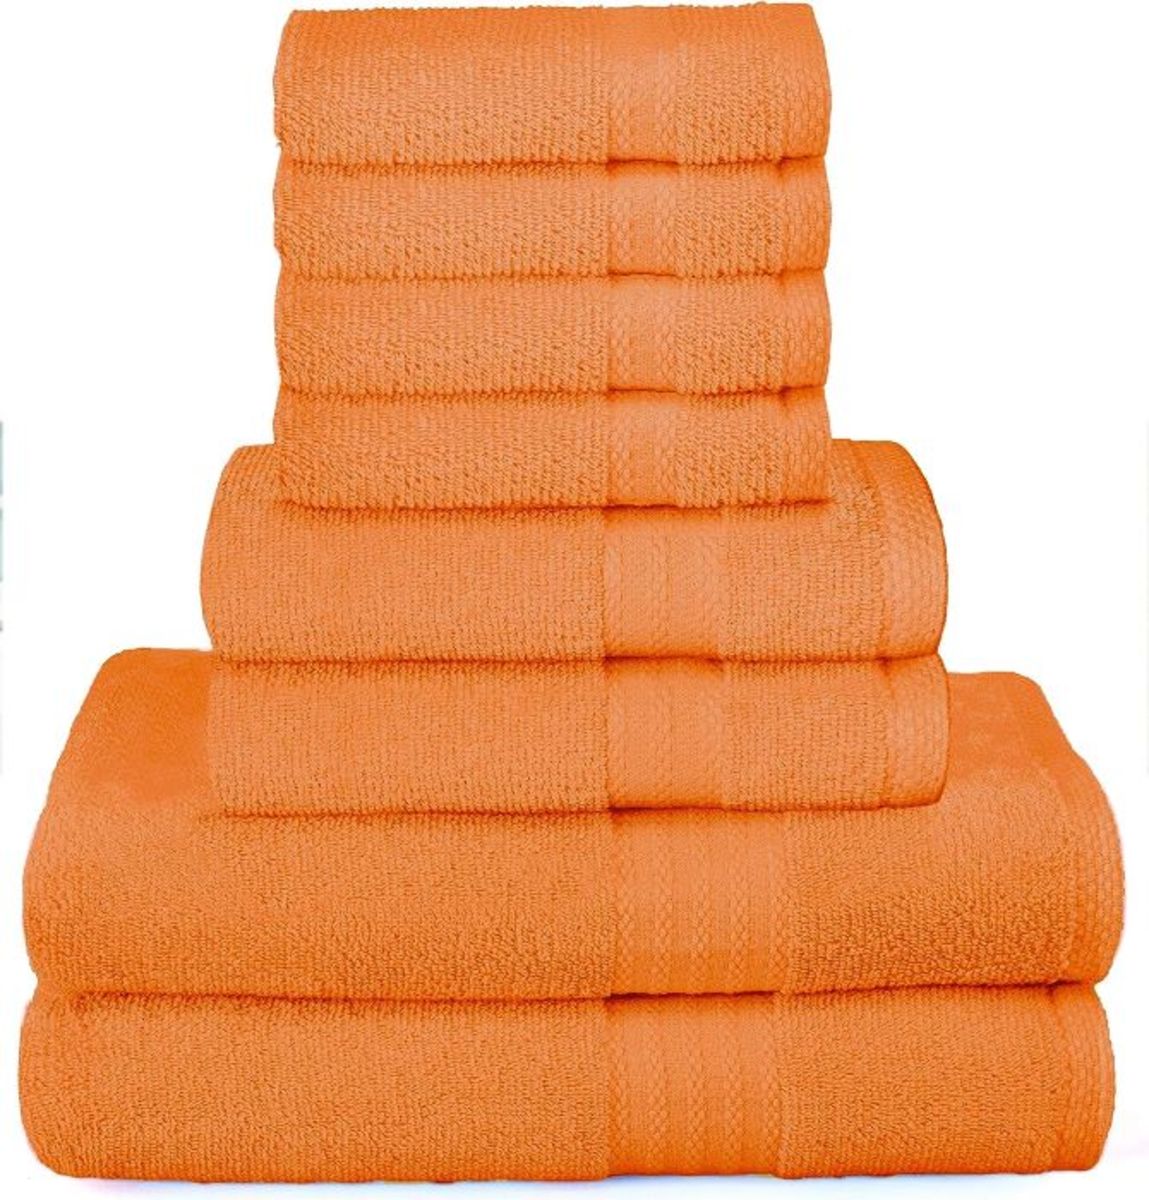 This 8-piece towel set is on sale starting at $18 at  - TheStreet